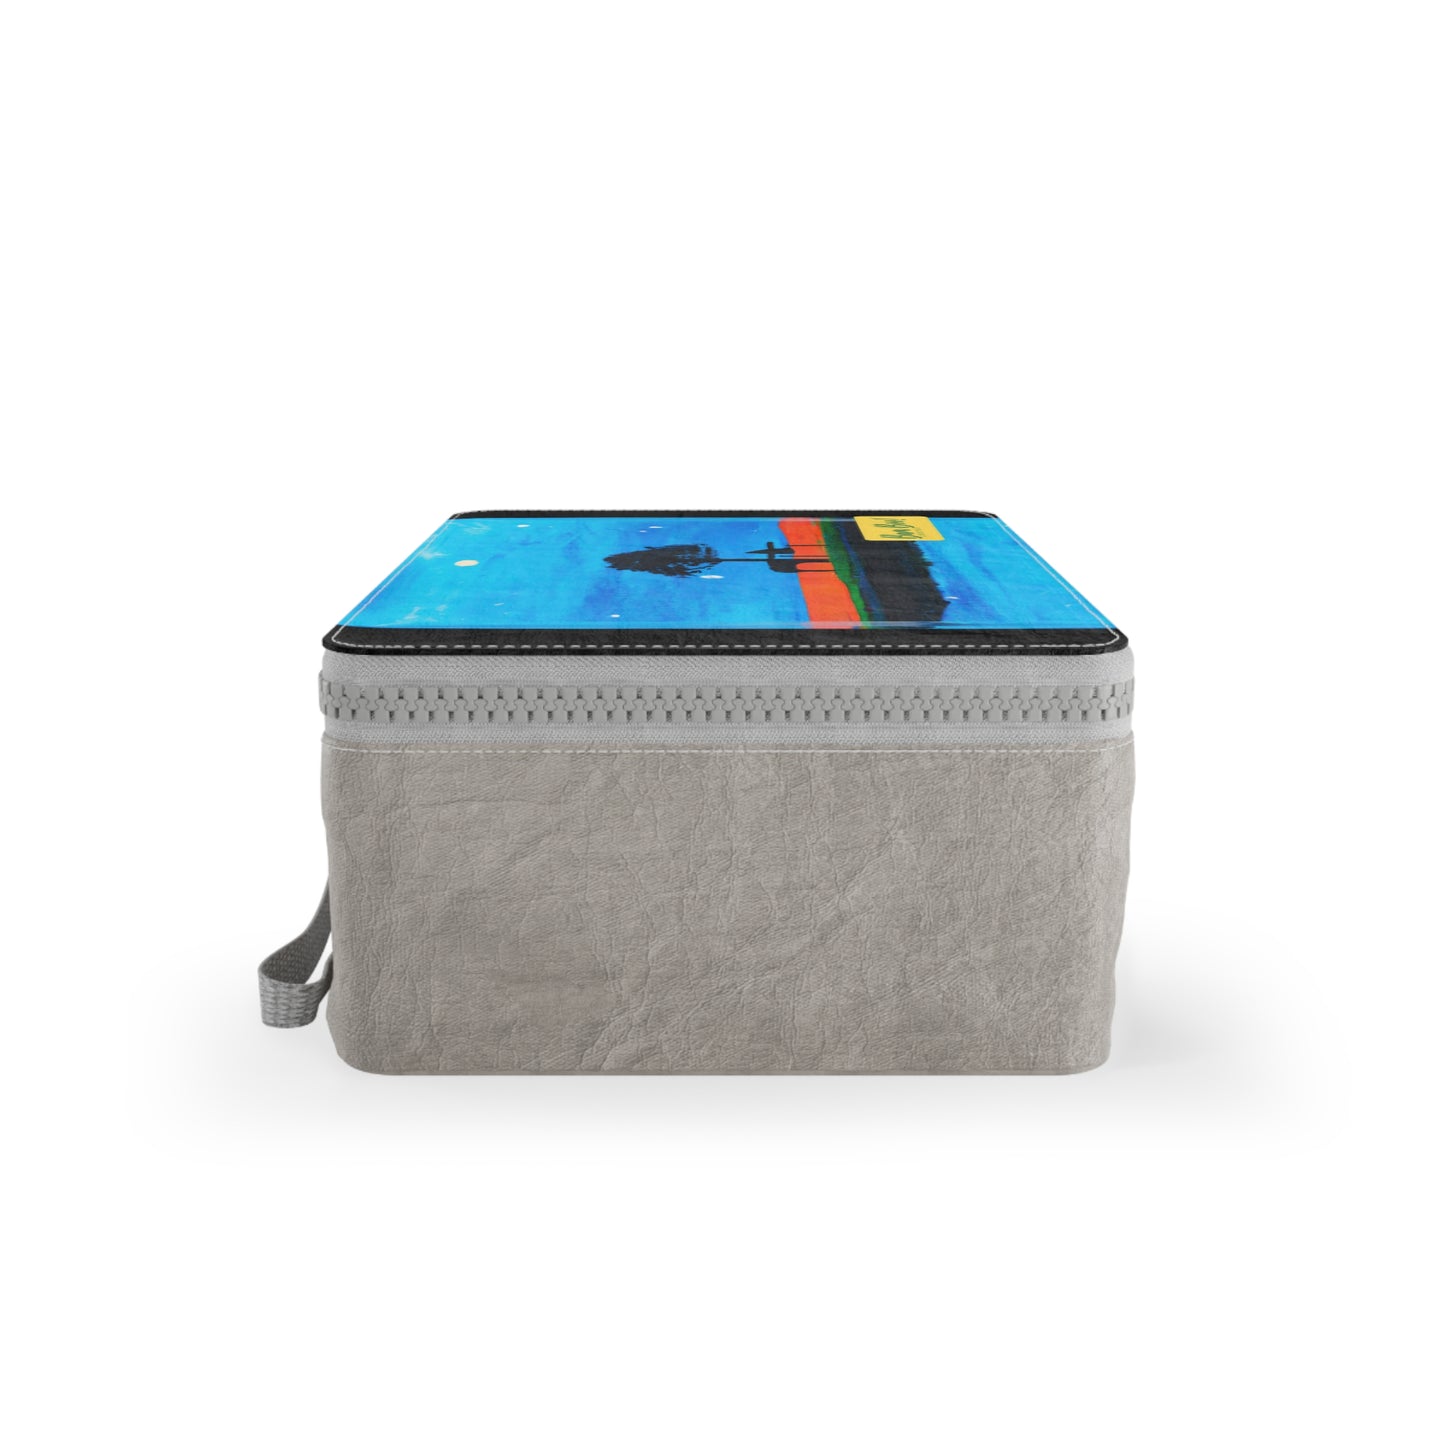 "Transformation's Beauty: Ordinary to Extraordinary" - Bam Boo! Lifestyle Eco-friendly Paper Lunch Bag